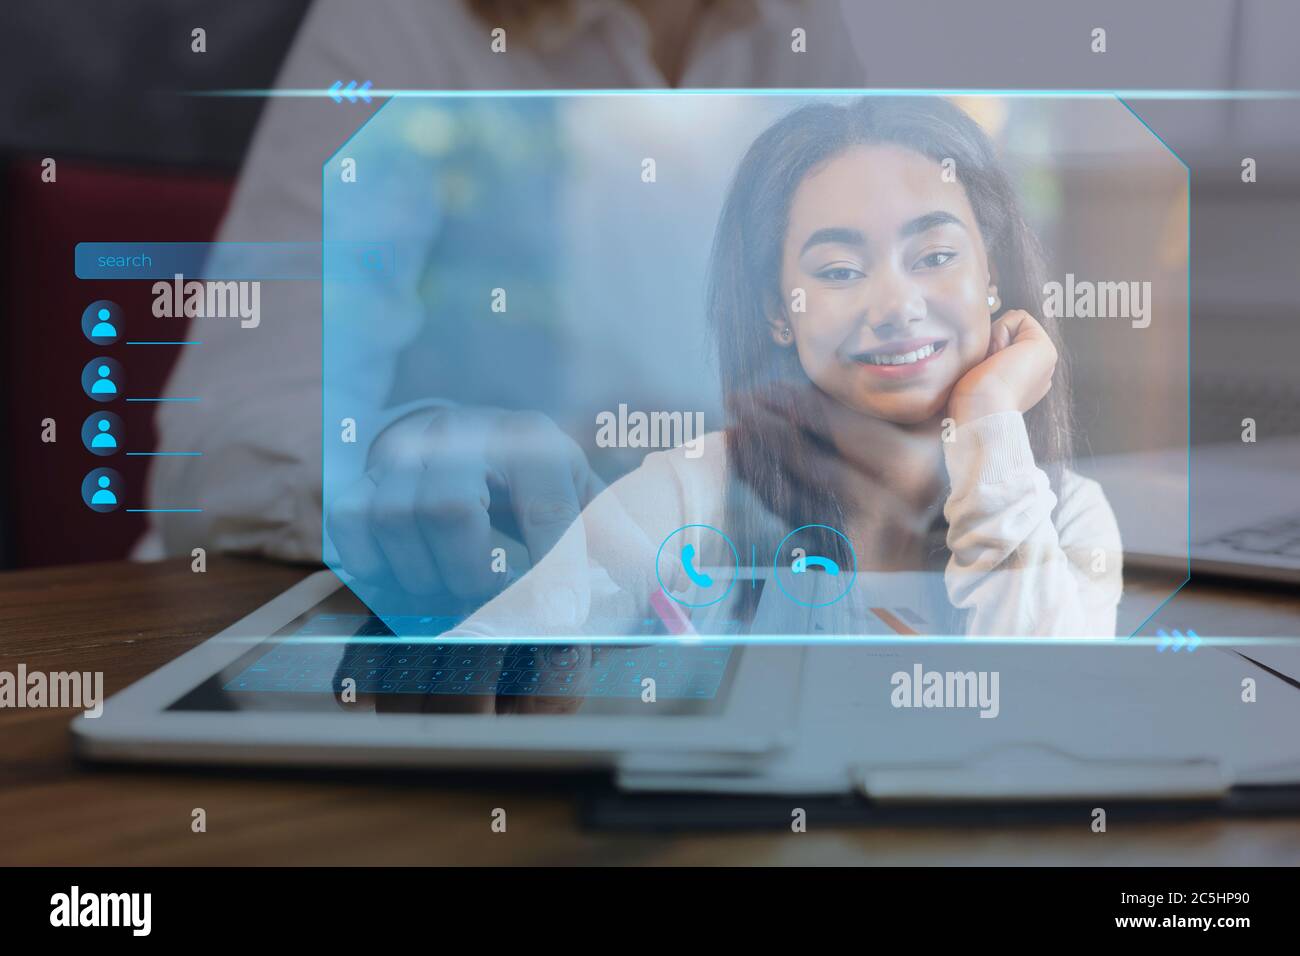 Woman Making Video Call Using Digital Tablet, Collage, Double Exposure Stock Photo